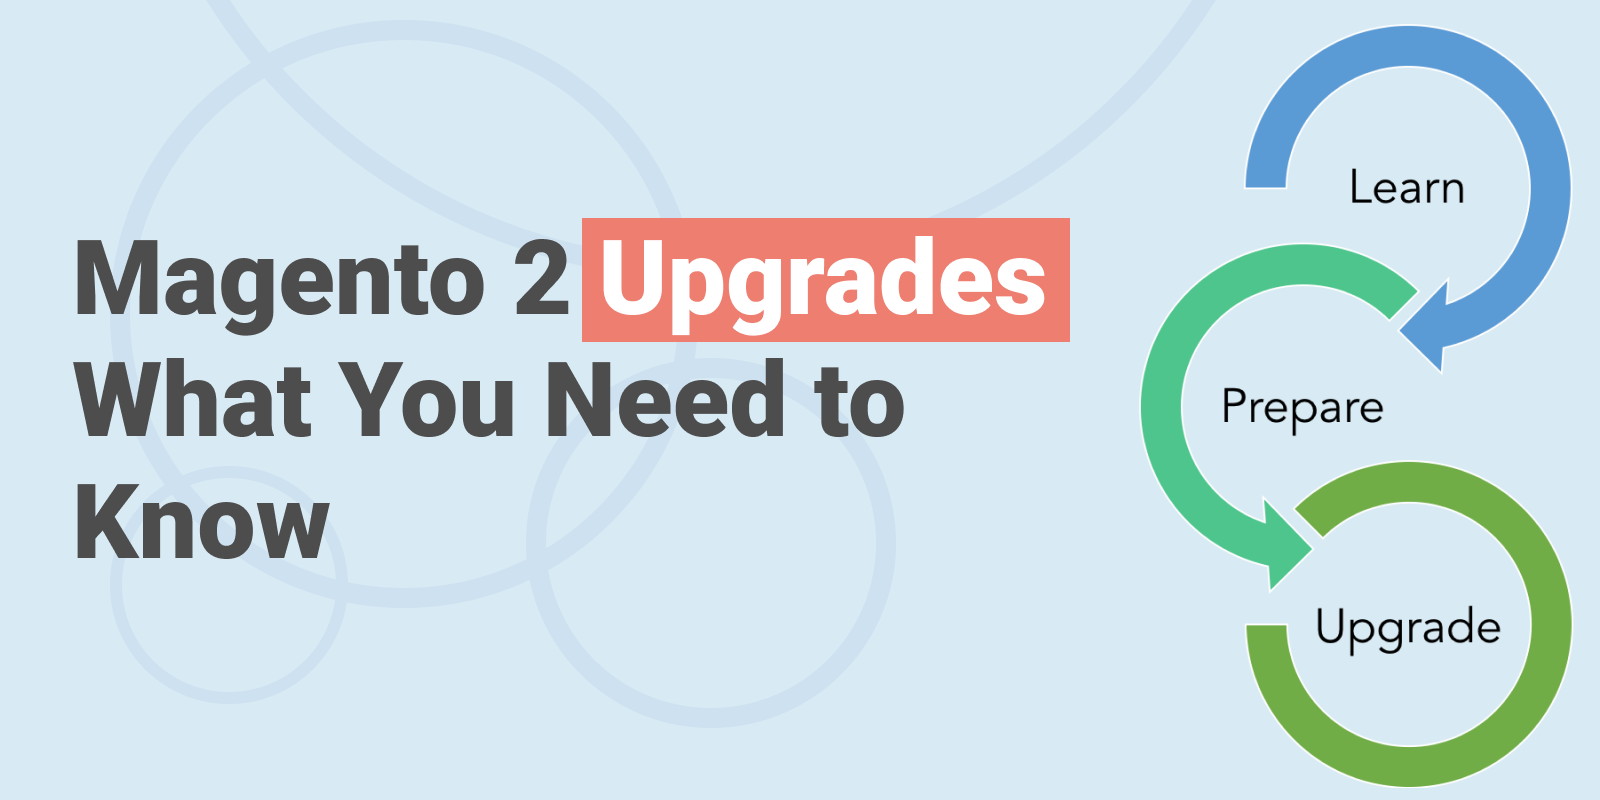  Magento 2 Upgrades: What You Need to Know